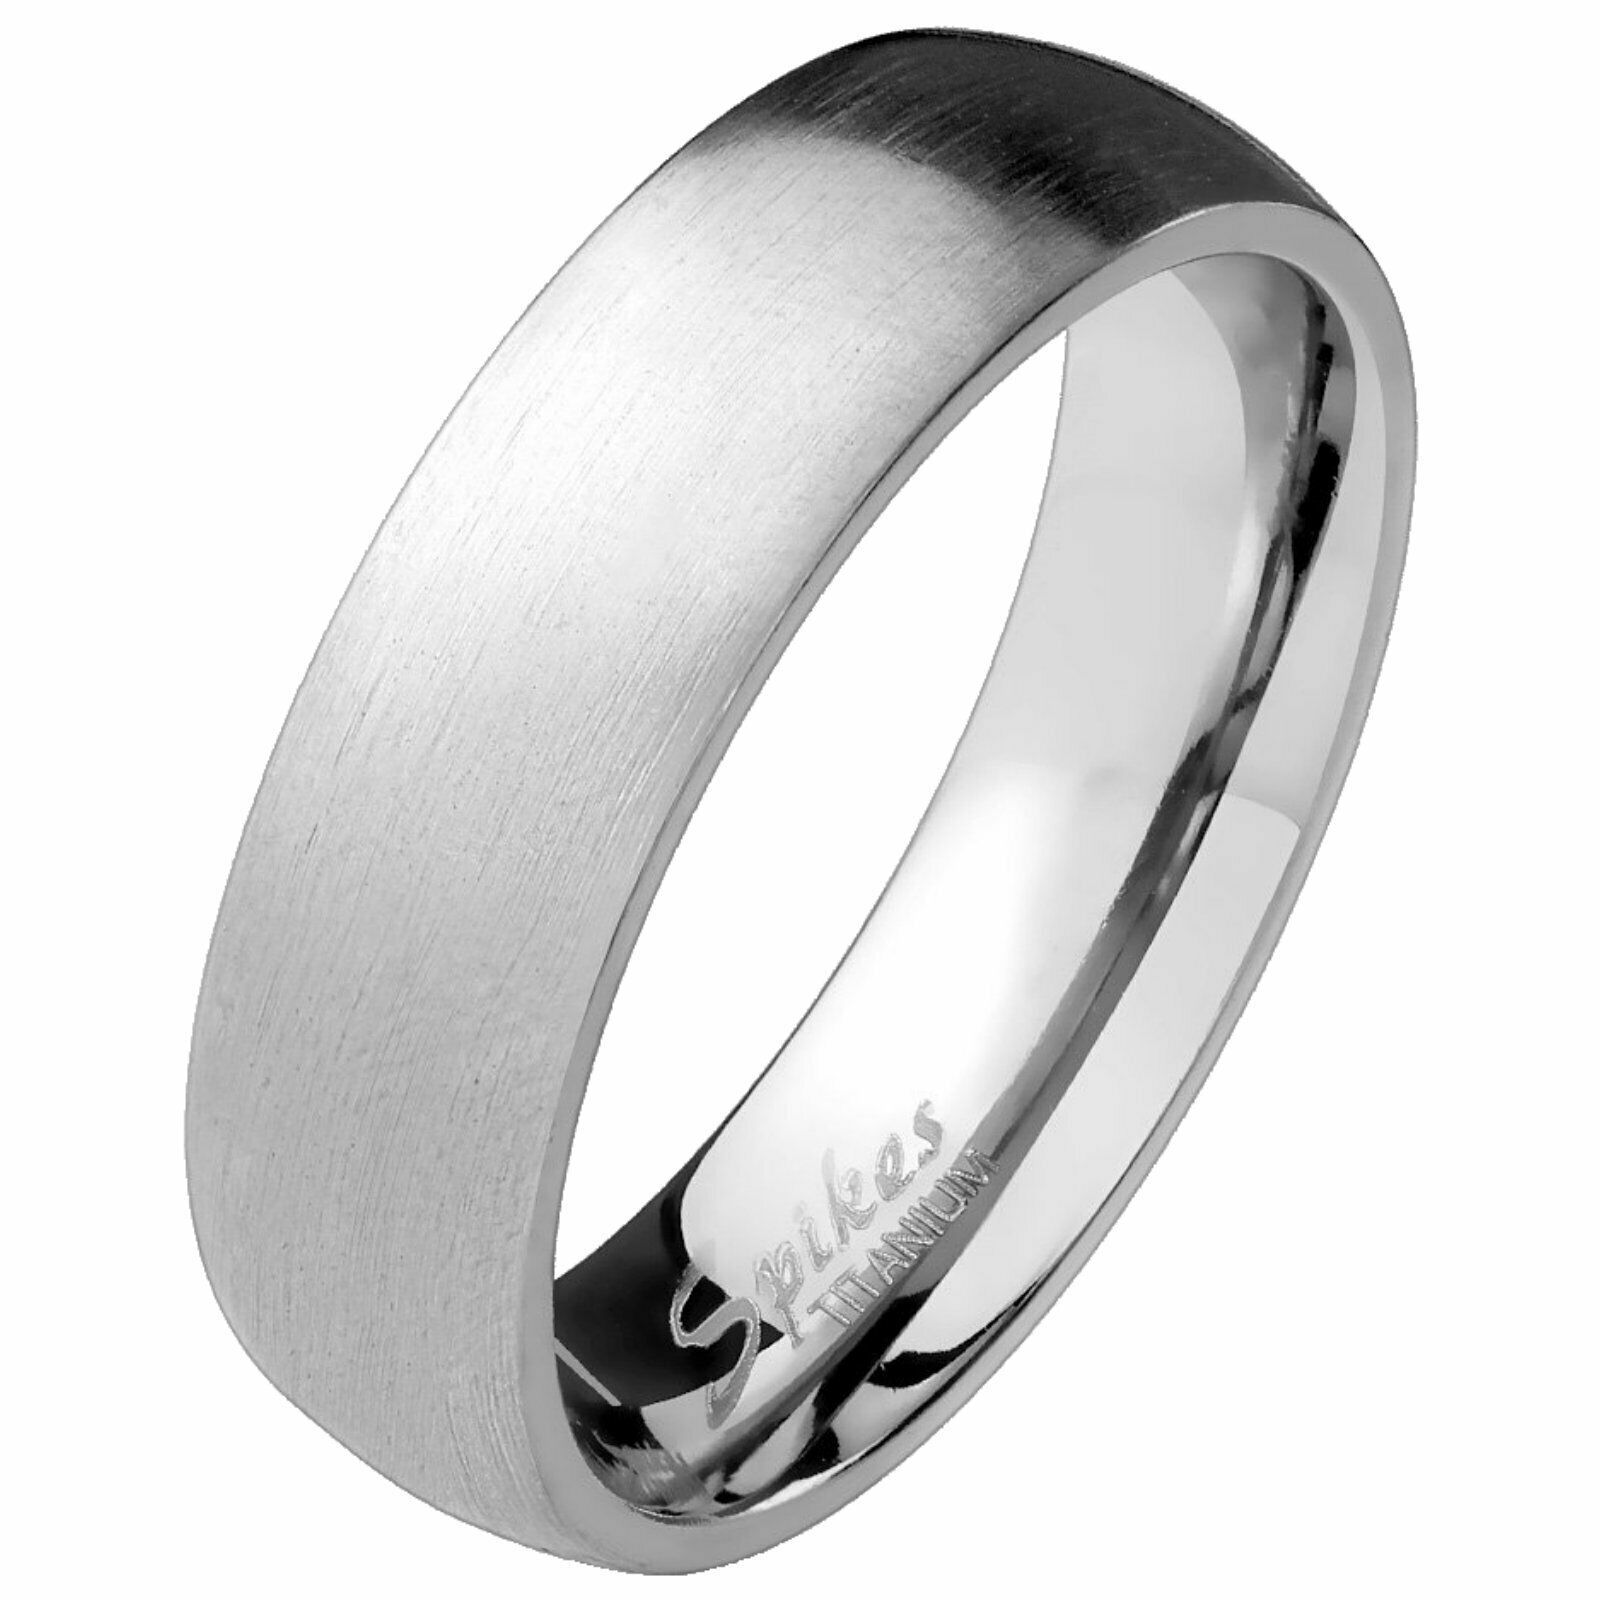 Primary image for Classic Titanium Ring Mens Womens Simple Wedding Band 6mm Anniversary Sizes 5-13